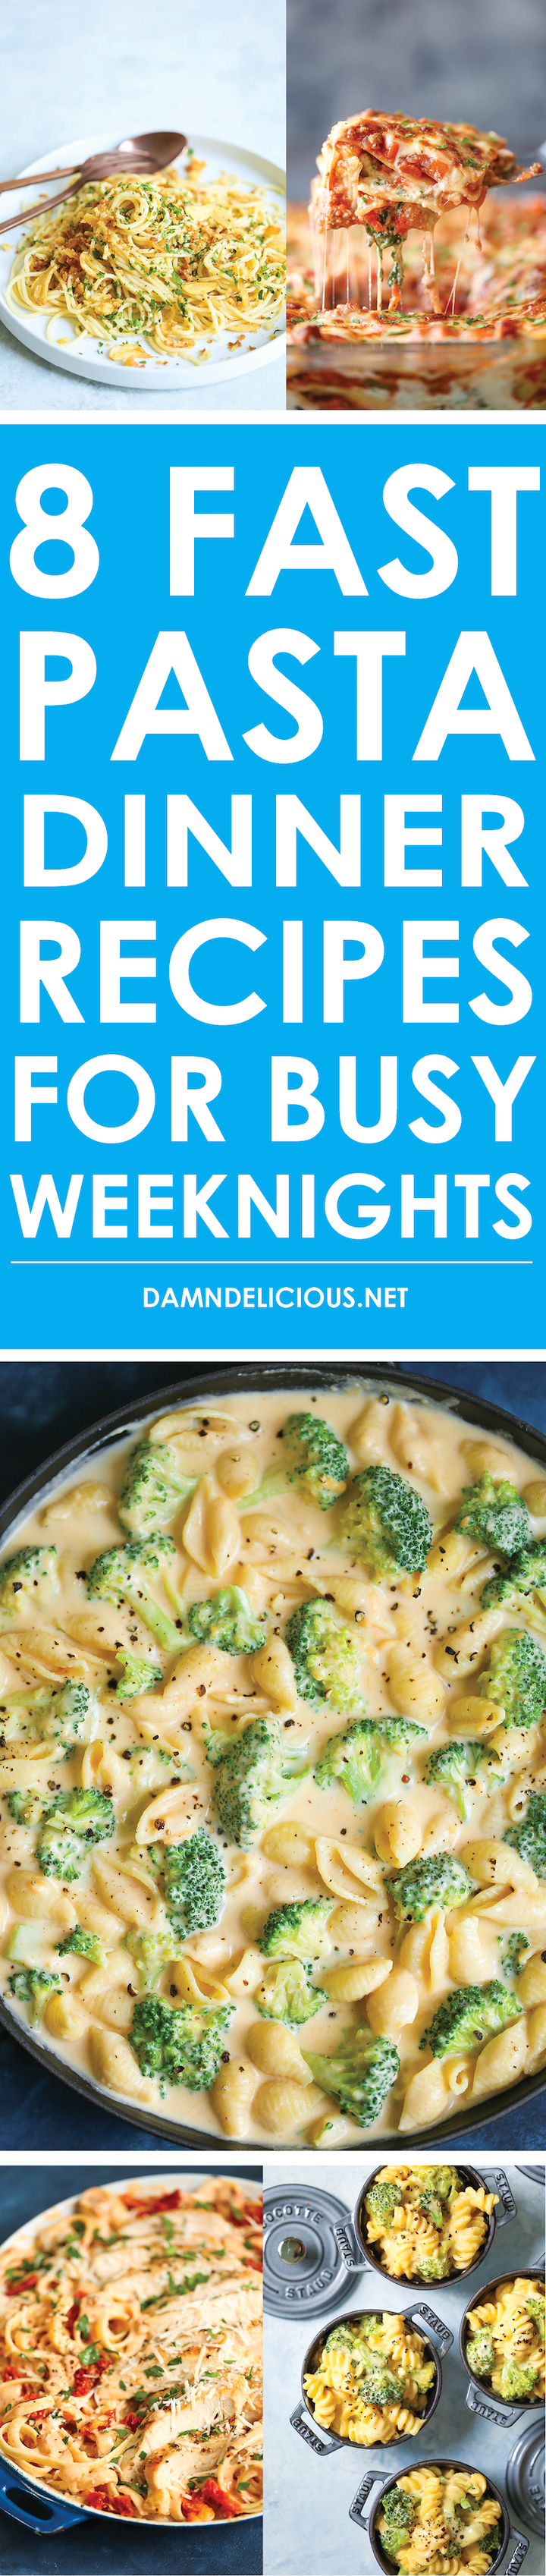 8 Fast Pasta Dinner Recipes for Busy Weeknights - Here are quick and easy pasta dinners for any night of the week! From everyone's favorite four cheese spaghetti to the creamiest broccoli mac and cheese!